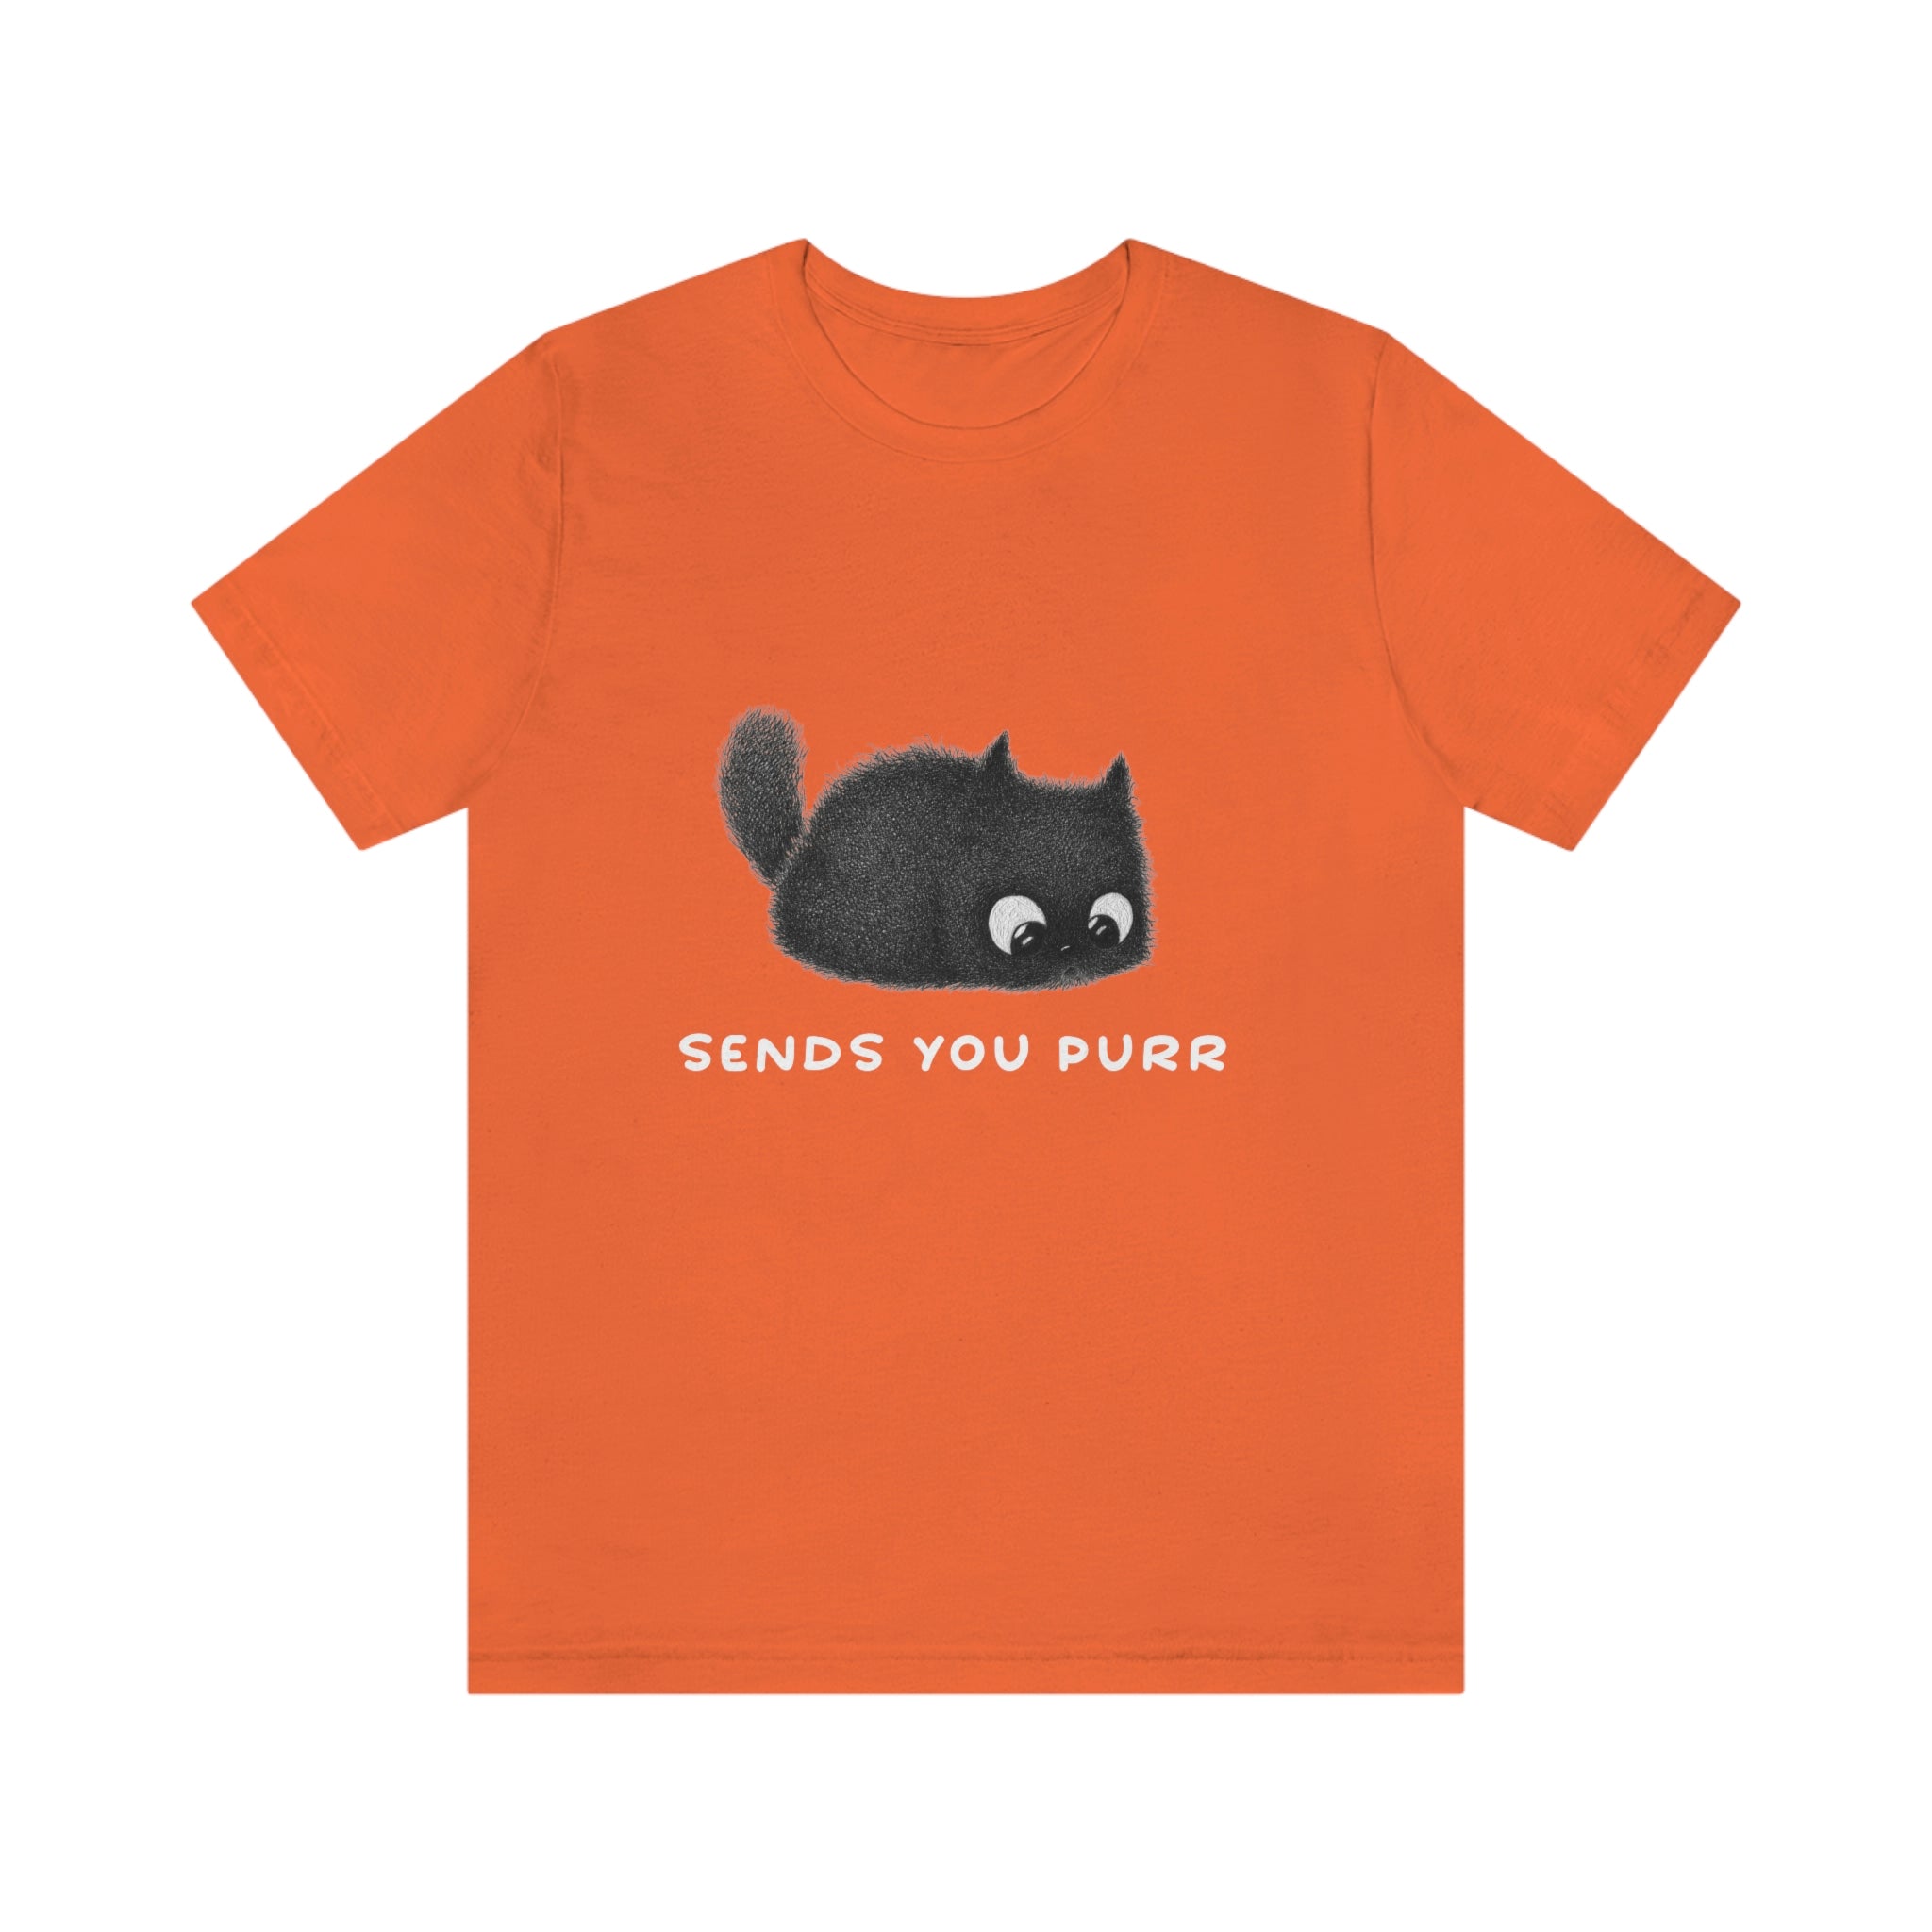 Sends You Purr : Unisex 100% Premium Comfy Cotton T-Shirt by Wholesomememes & Purr In Ink